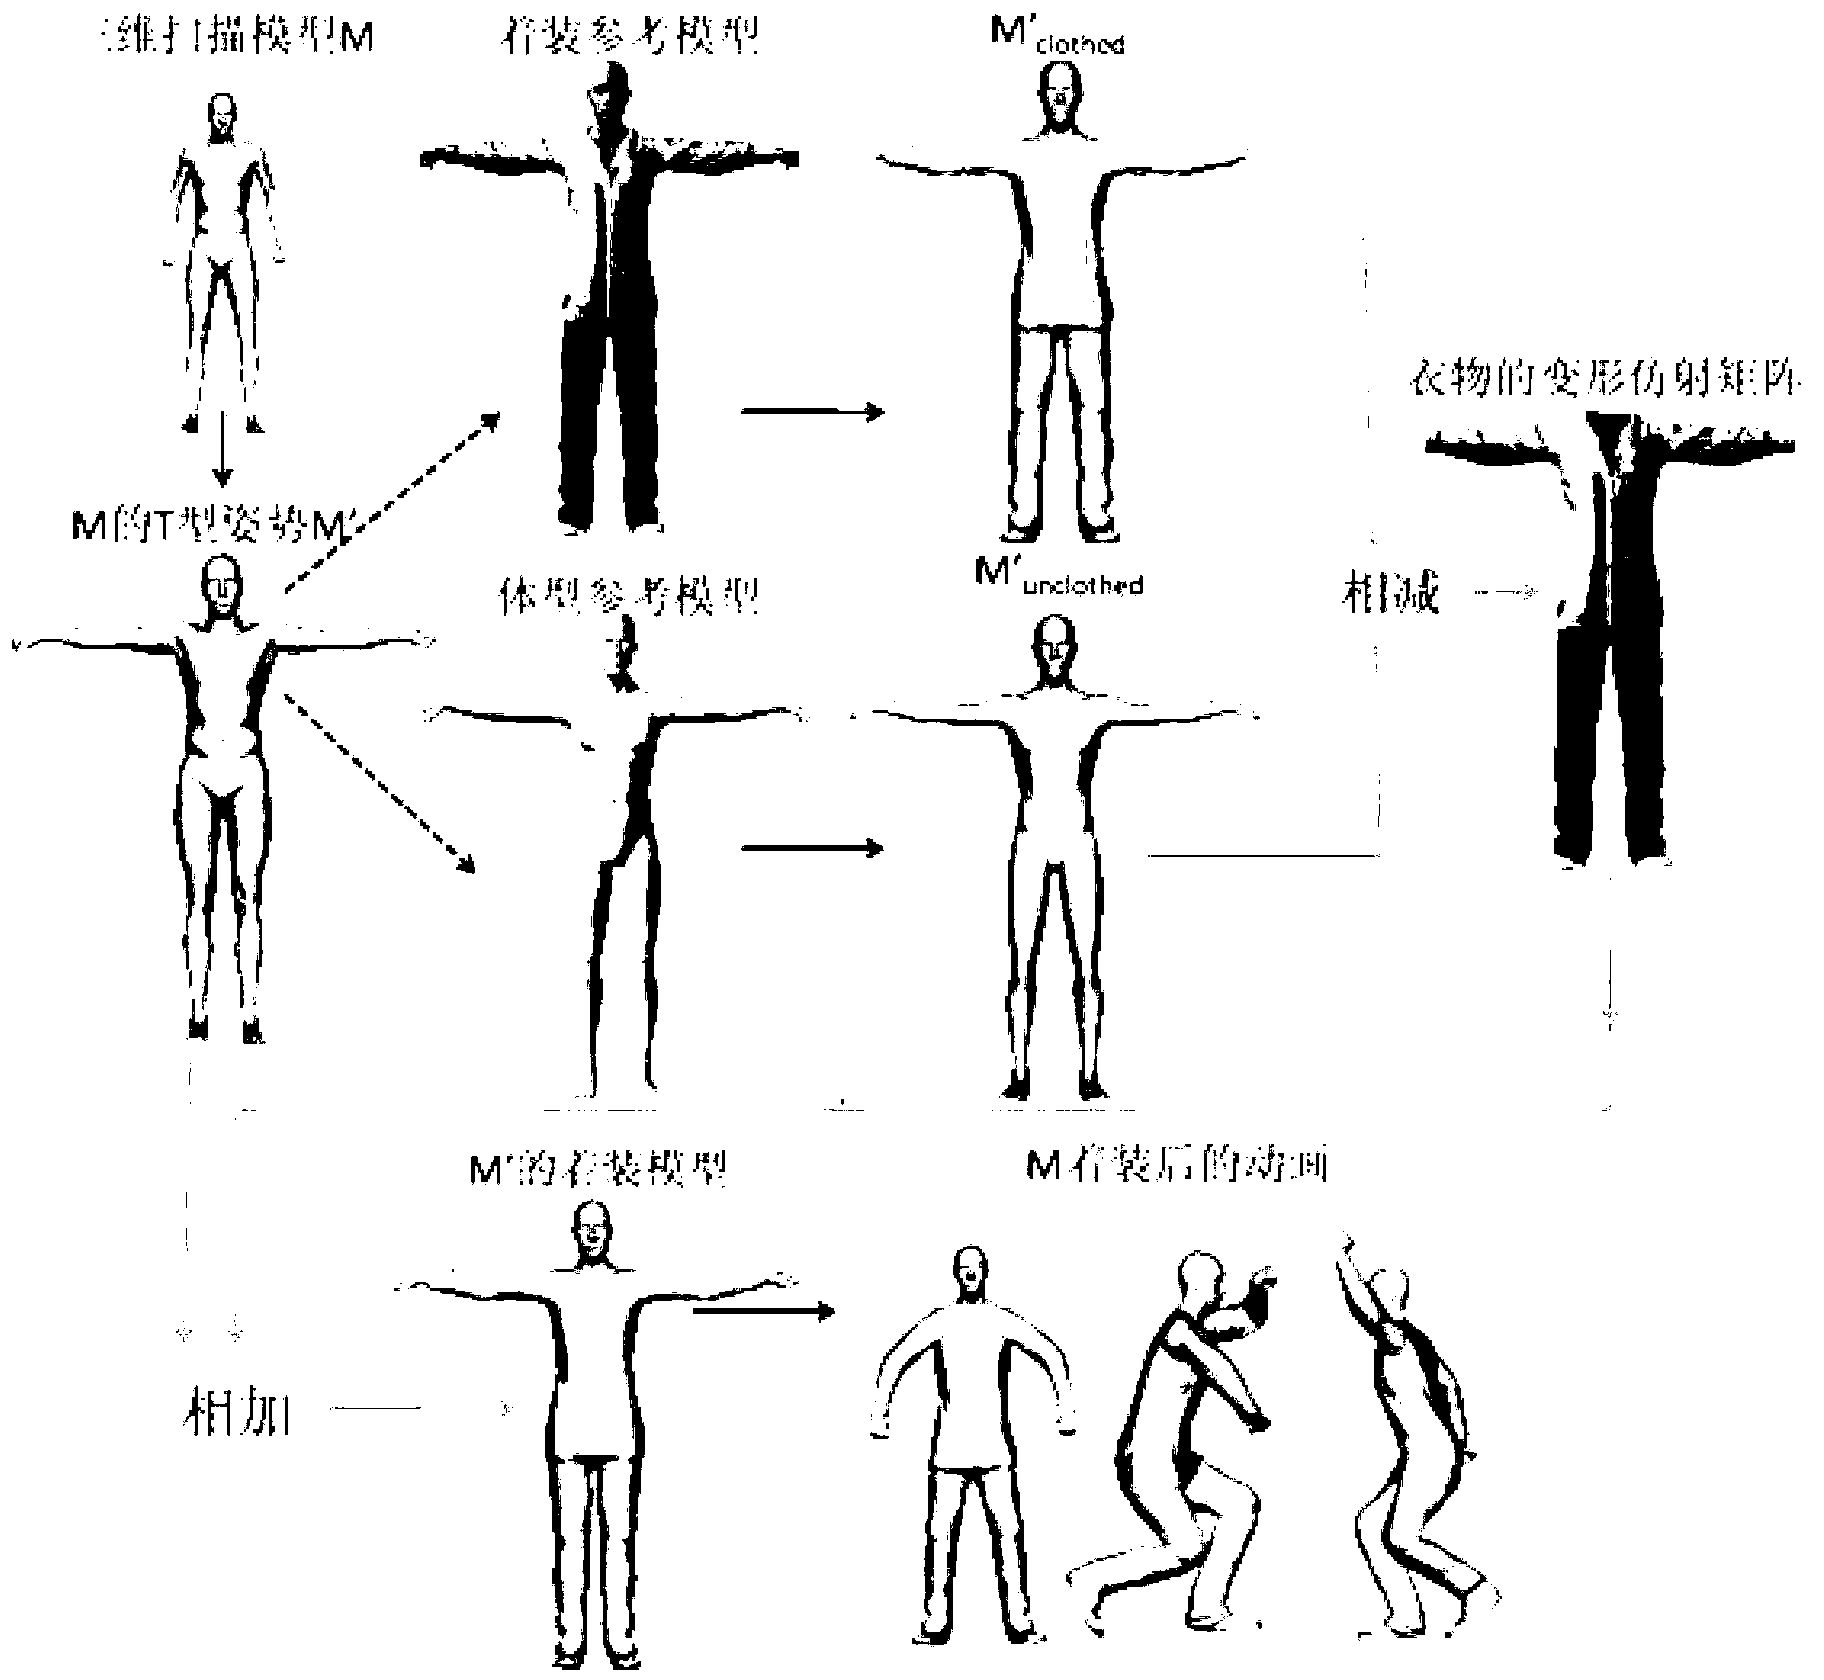 Estimation method for dressed body 3D model in single character image